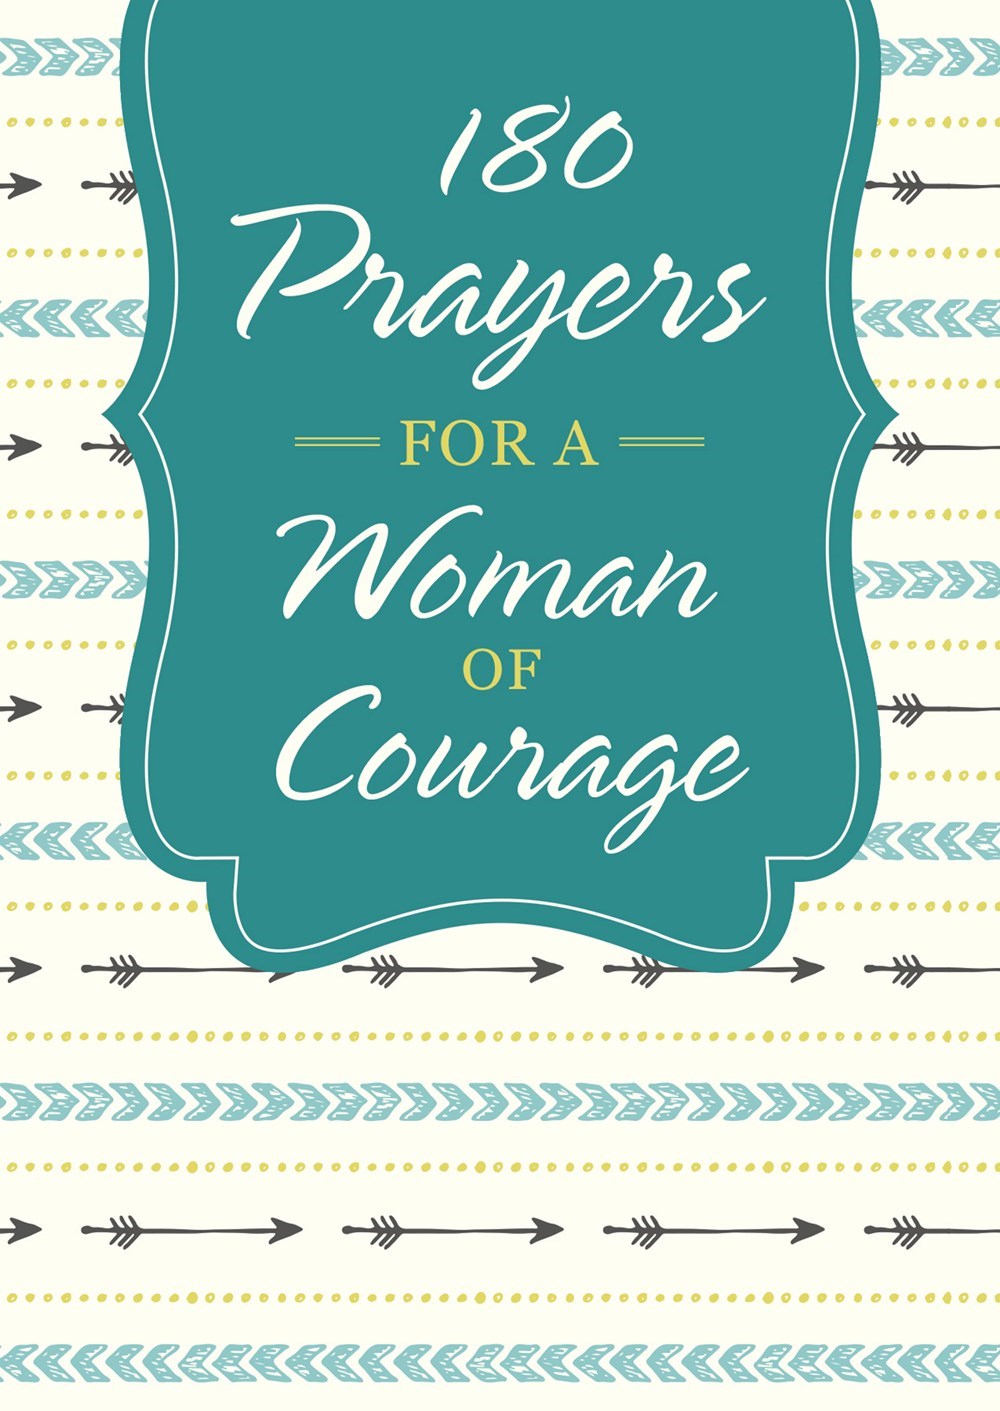 180 Prayers for a Woman of Courage - The Christian Gift Company